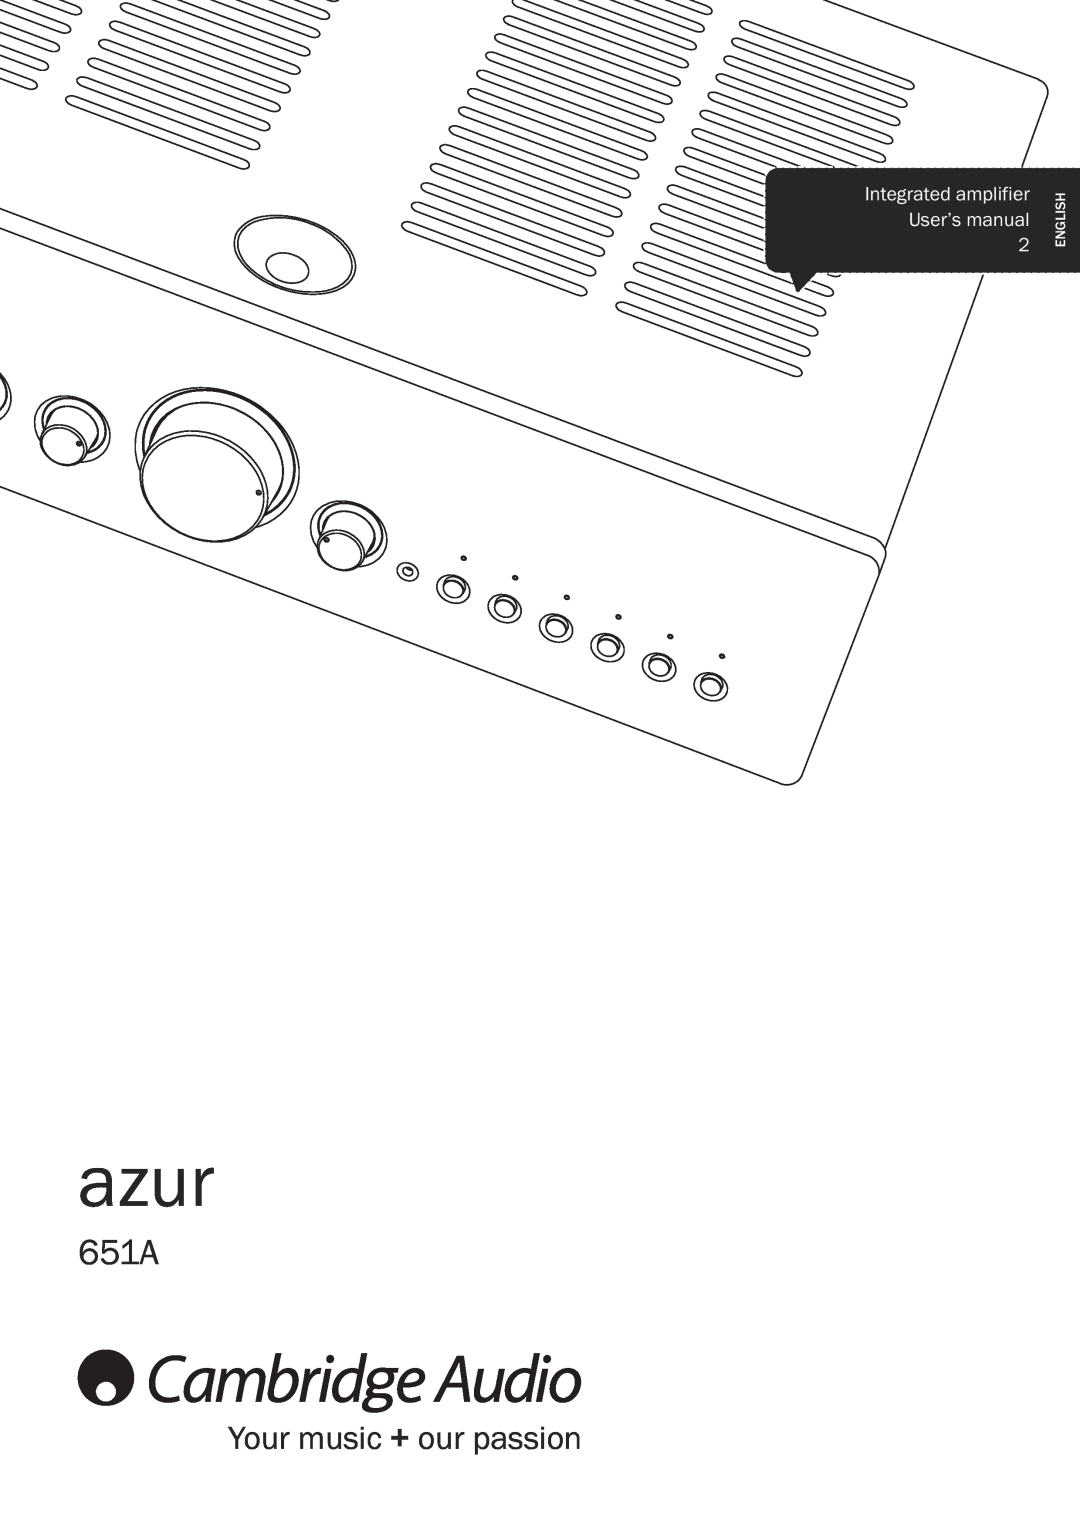 Cambridge Audio 651A user manual azur, Your music + our passion, English 